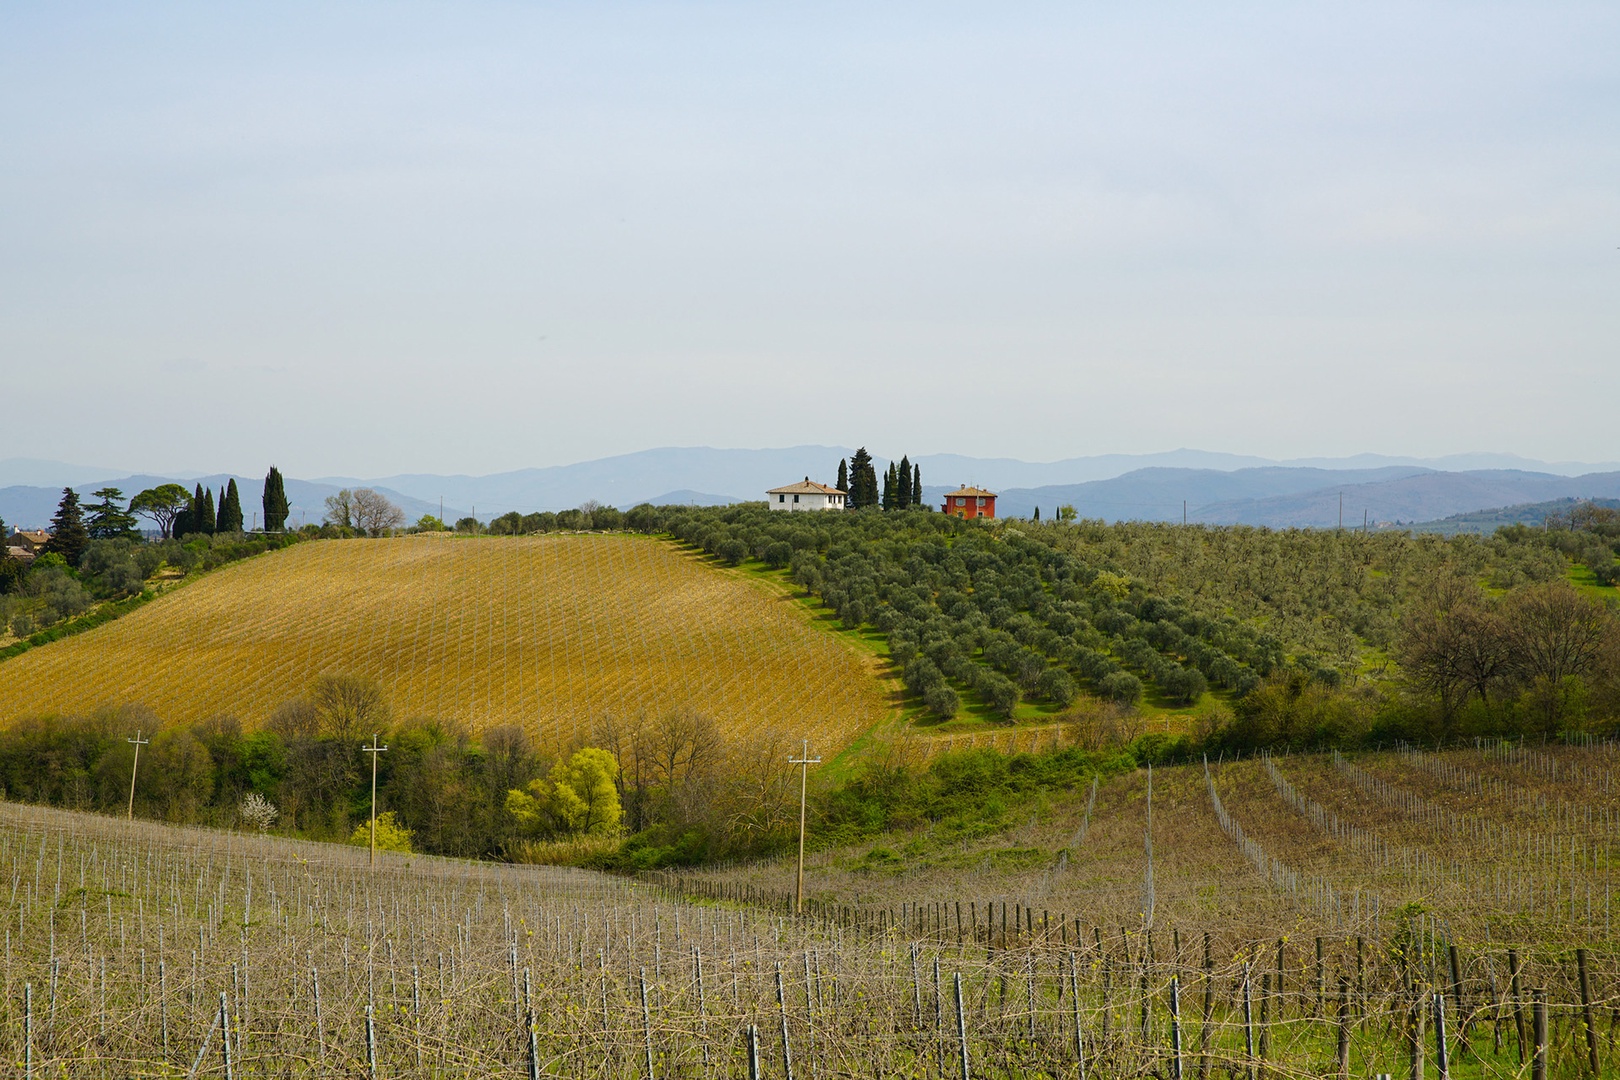 Beautiful views of the vineyards and Tuscan hills.